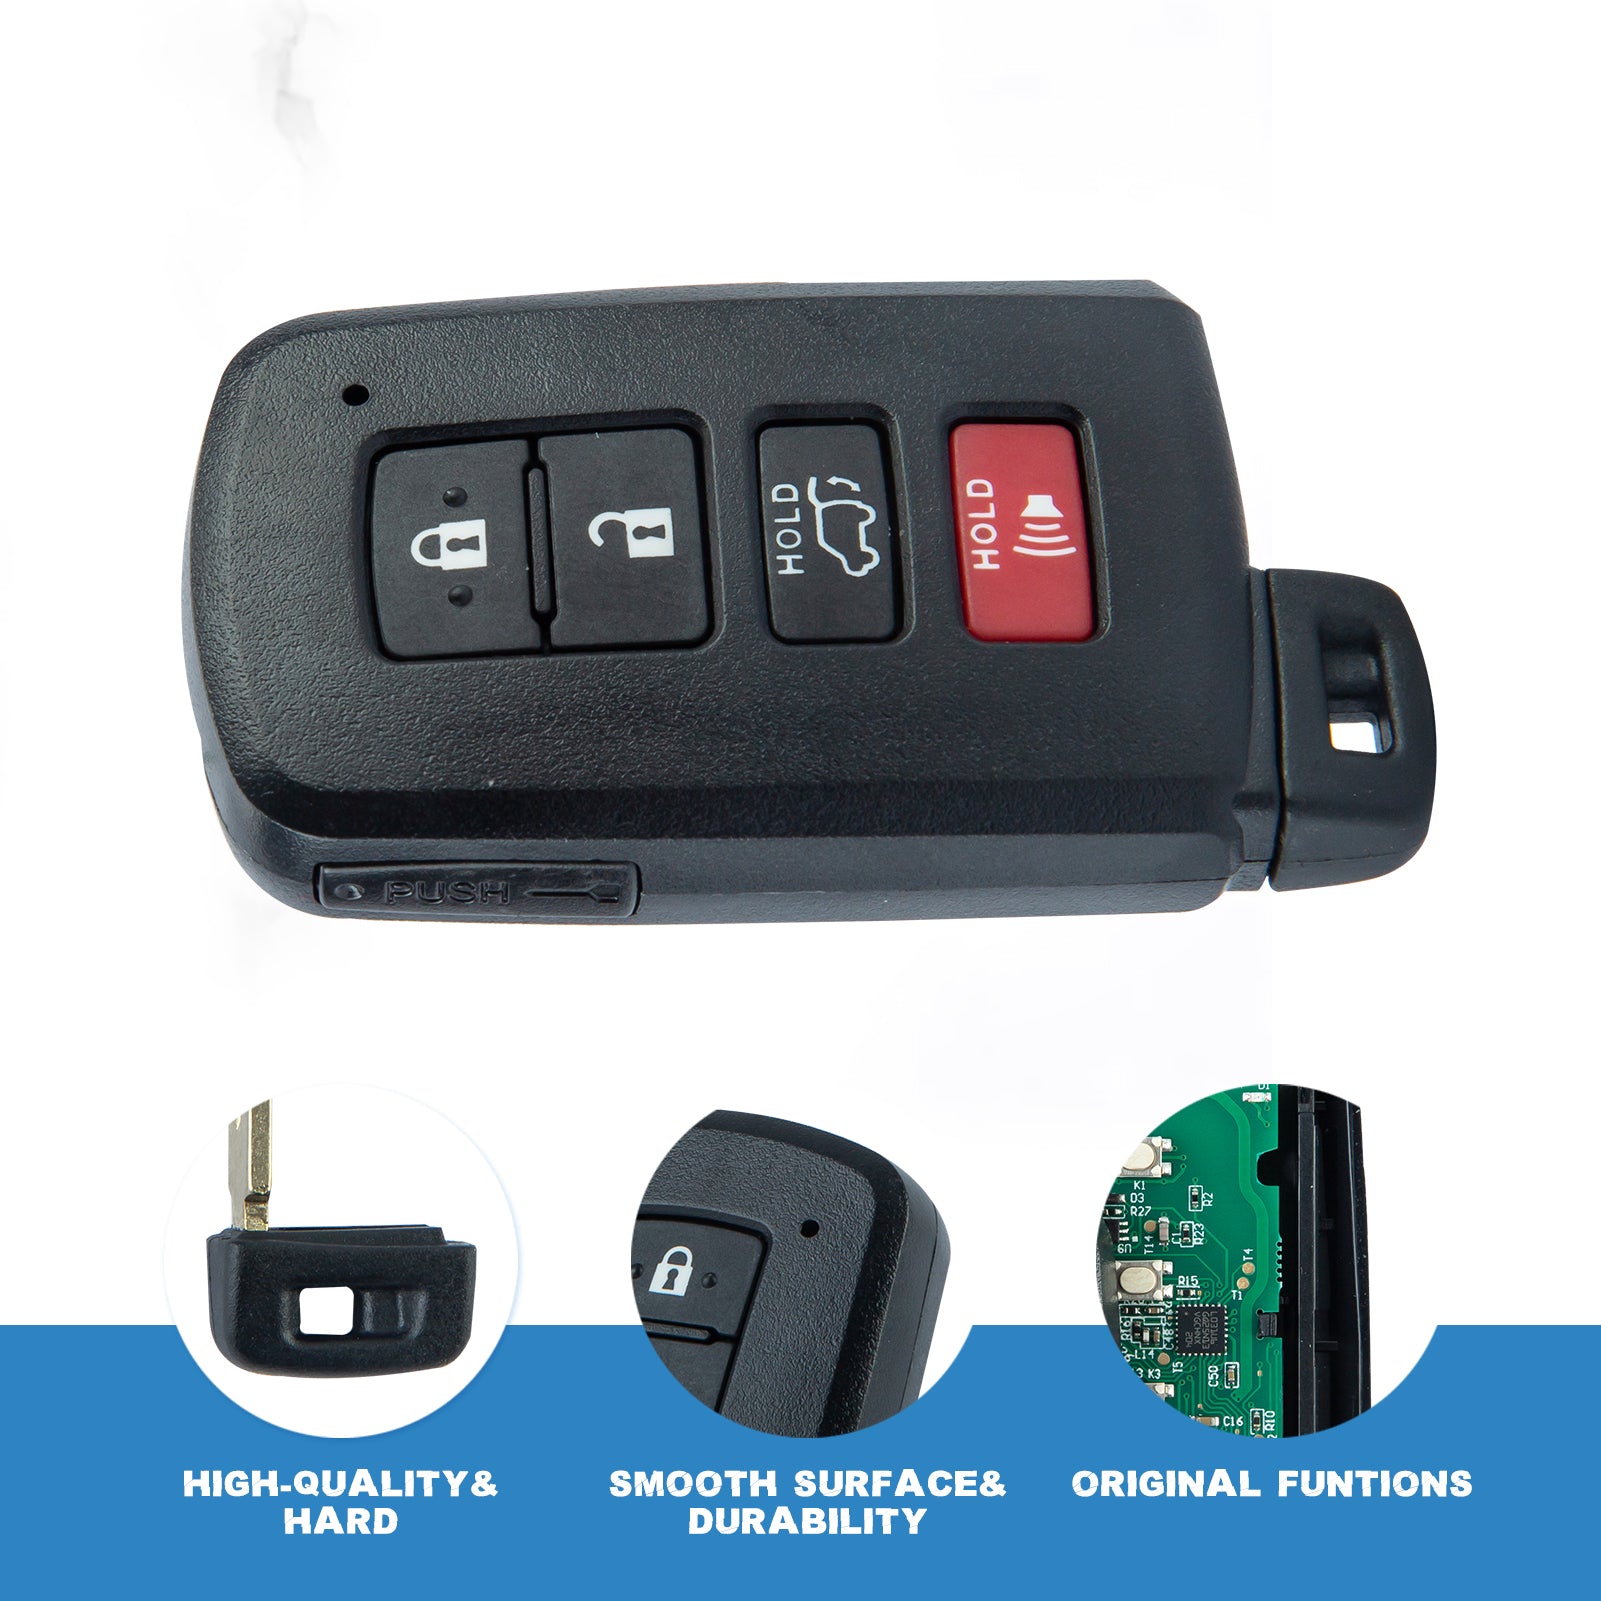 New Remote Key Fob 4 BTN Replacement for 2013-2018 Toyota RAV4 with FCC ID: HYQ14FBA (281451-0020) Keyless Entry Uncut Transponder